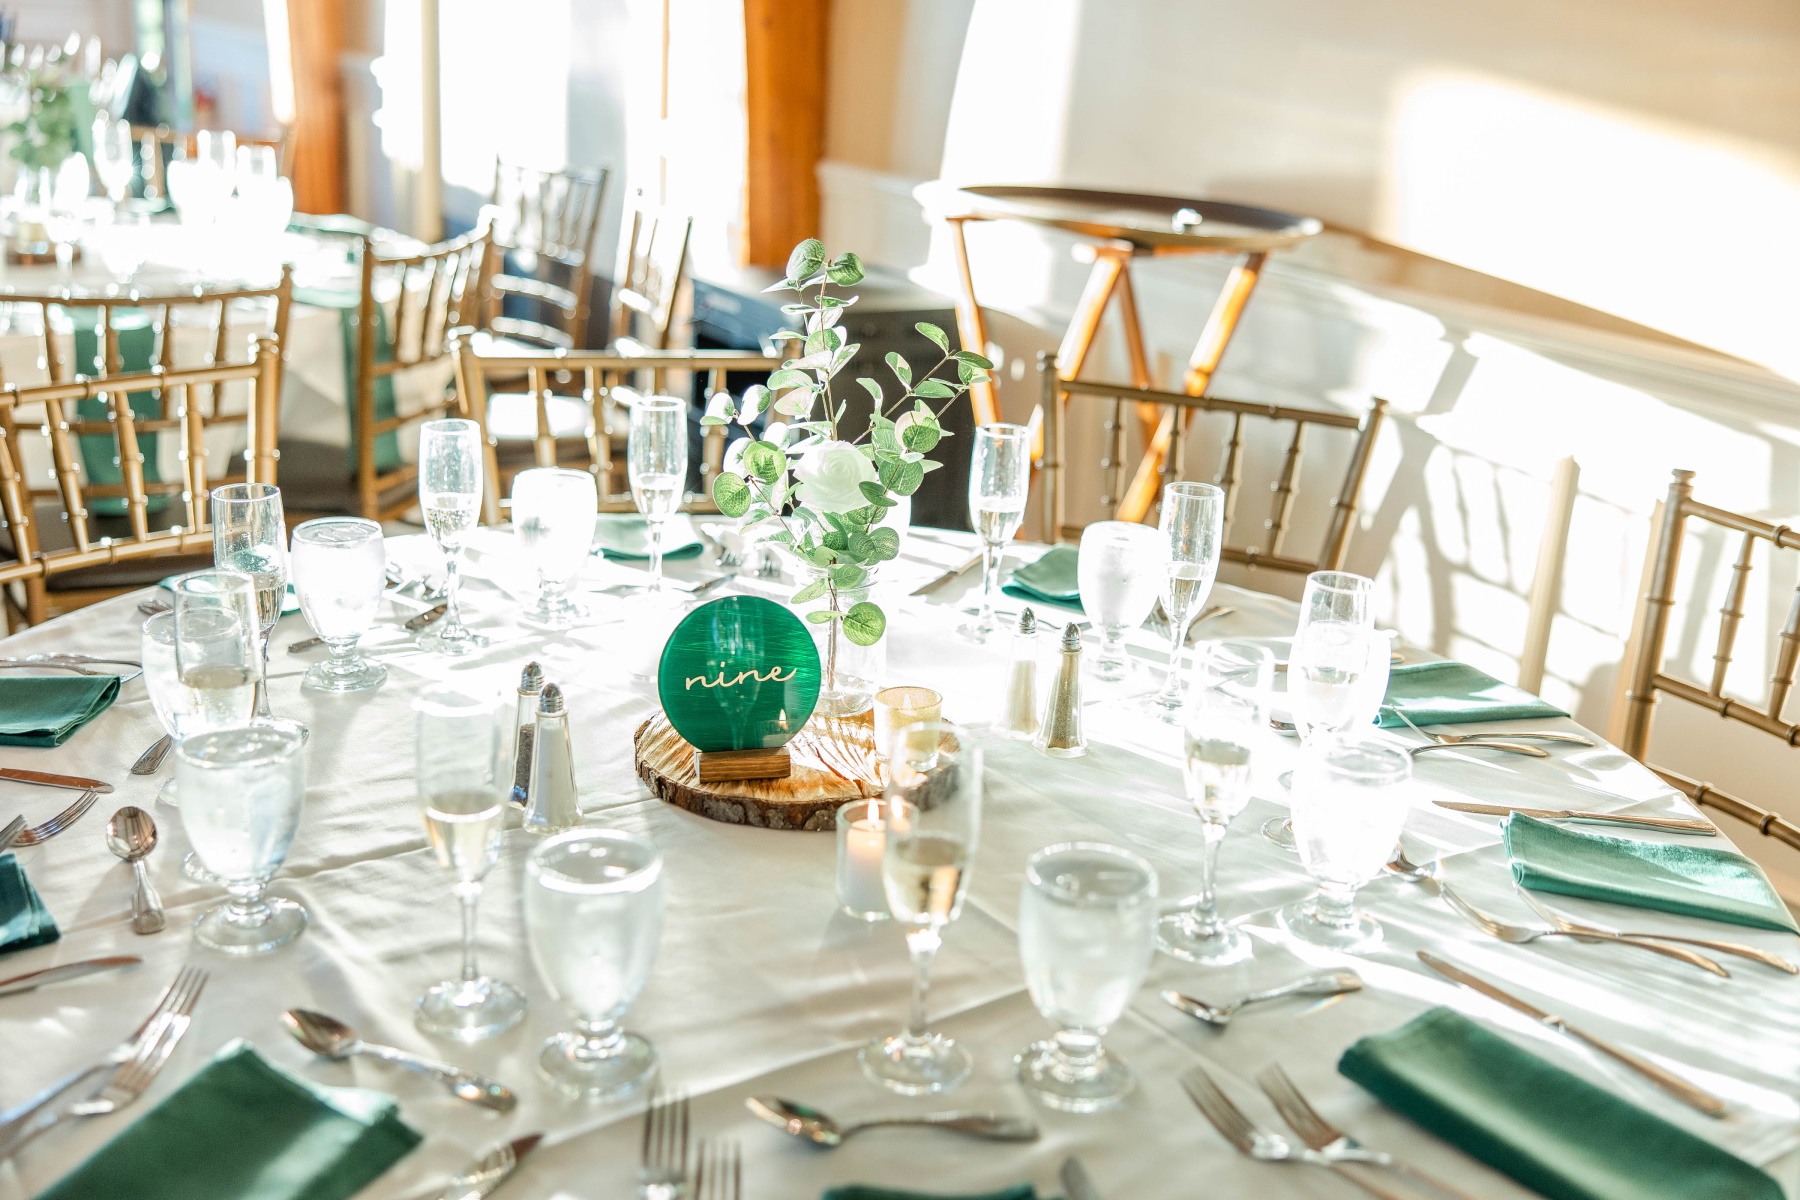 Detail photo showing the dining setup with Table Nine and Green linens and florals at Great Neck Country Club Wedding